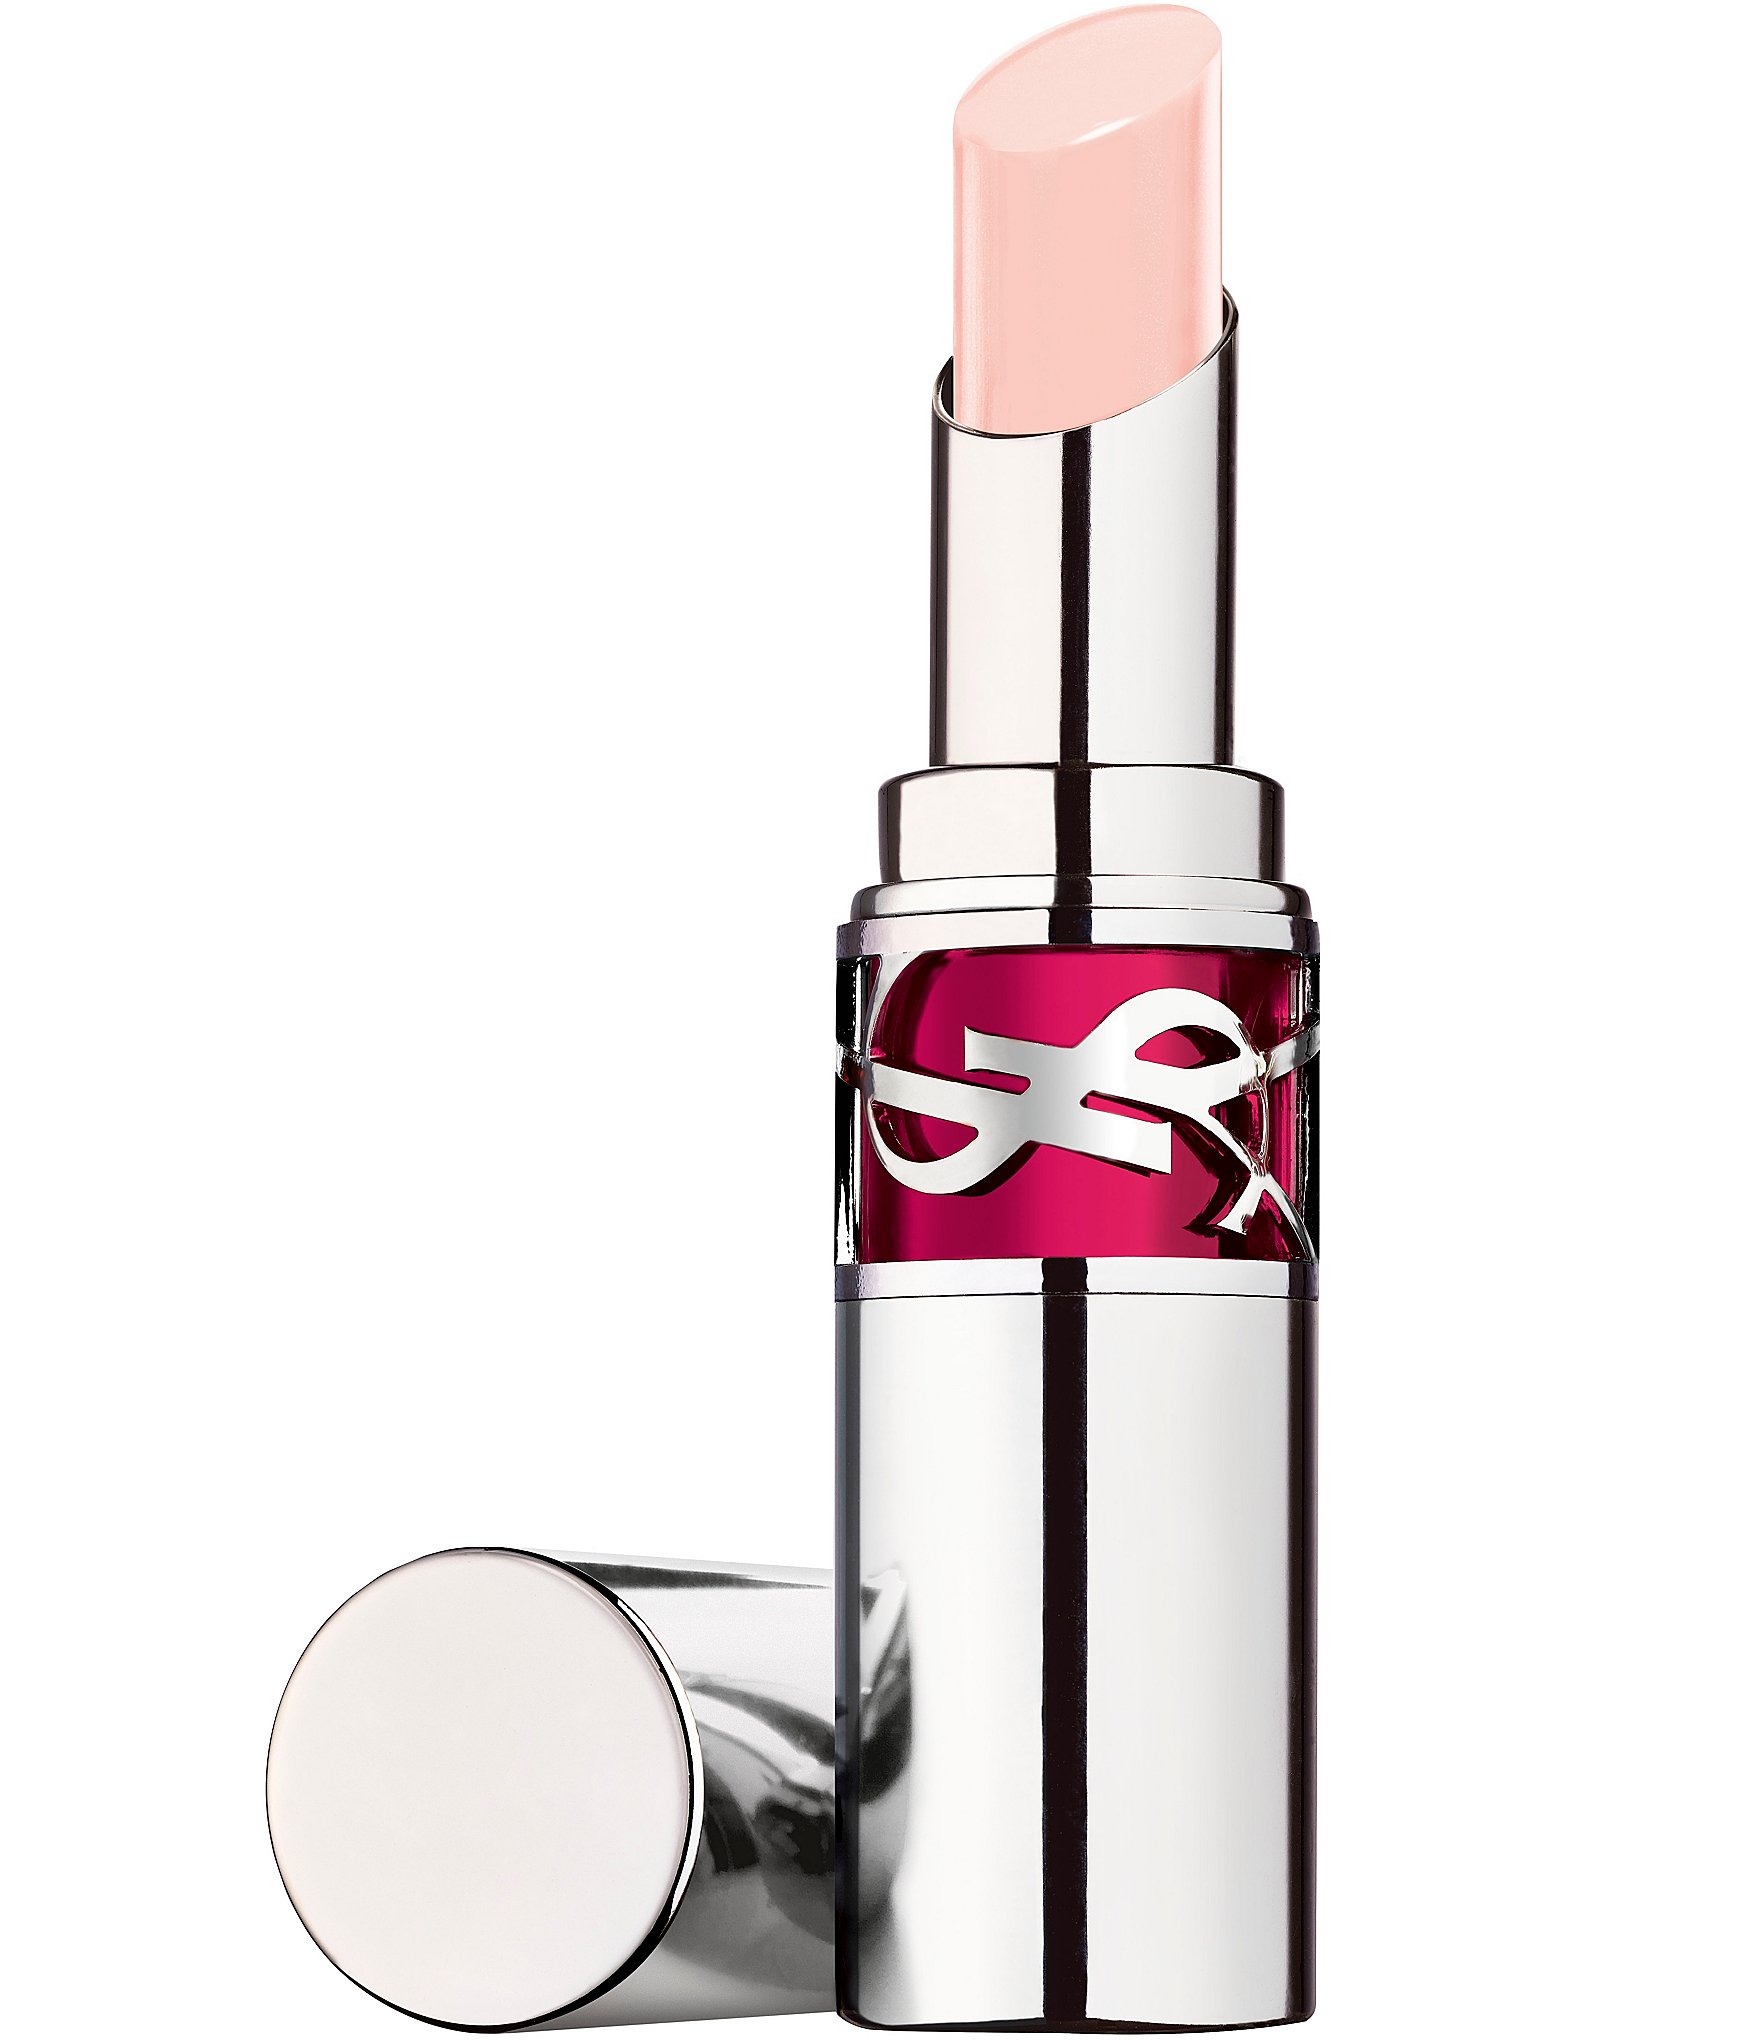 YSL Candy Glaze Lip Gloss Stick (new shades) - The Beauty Look Book